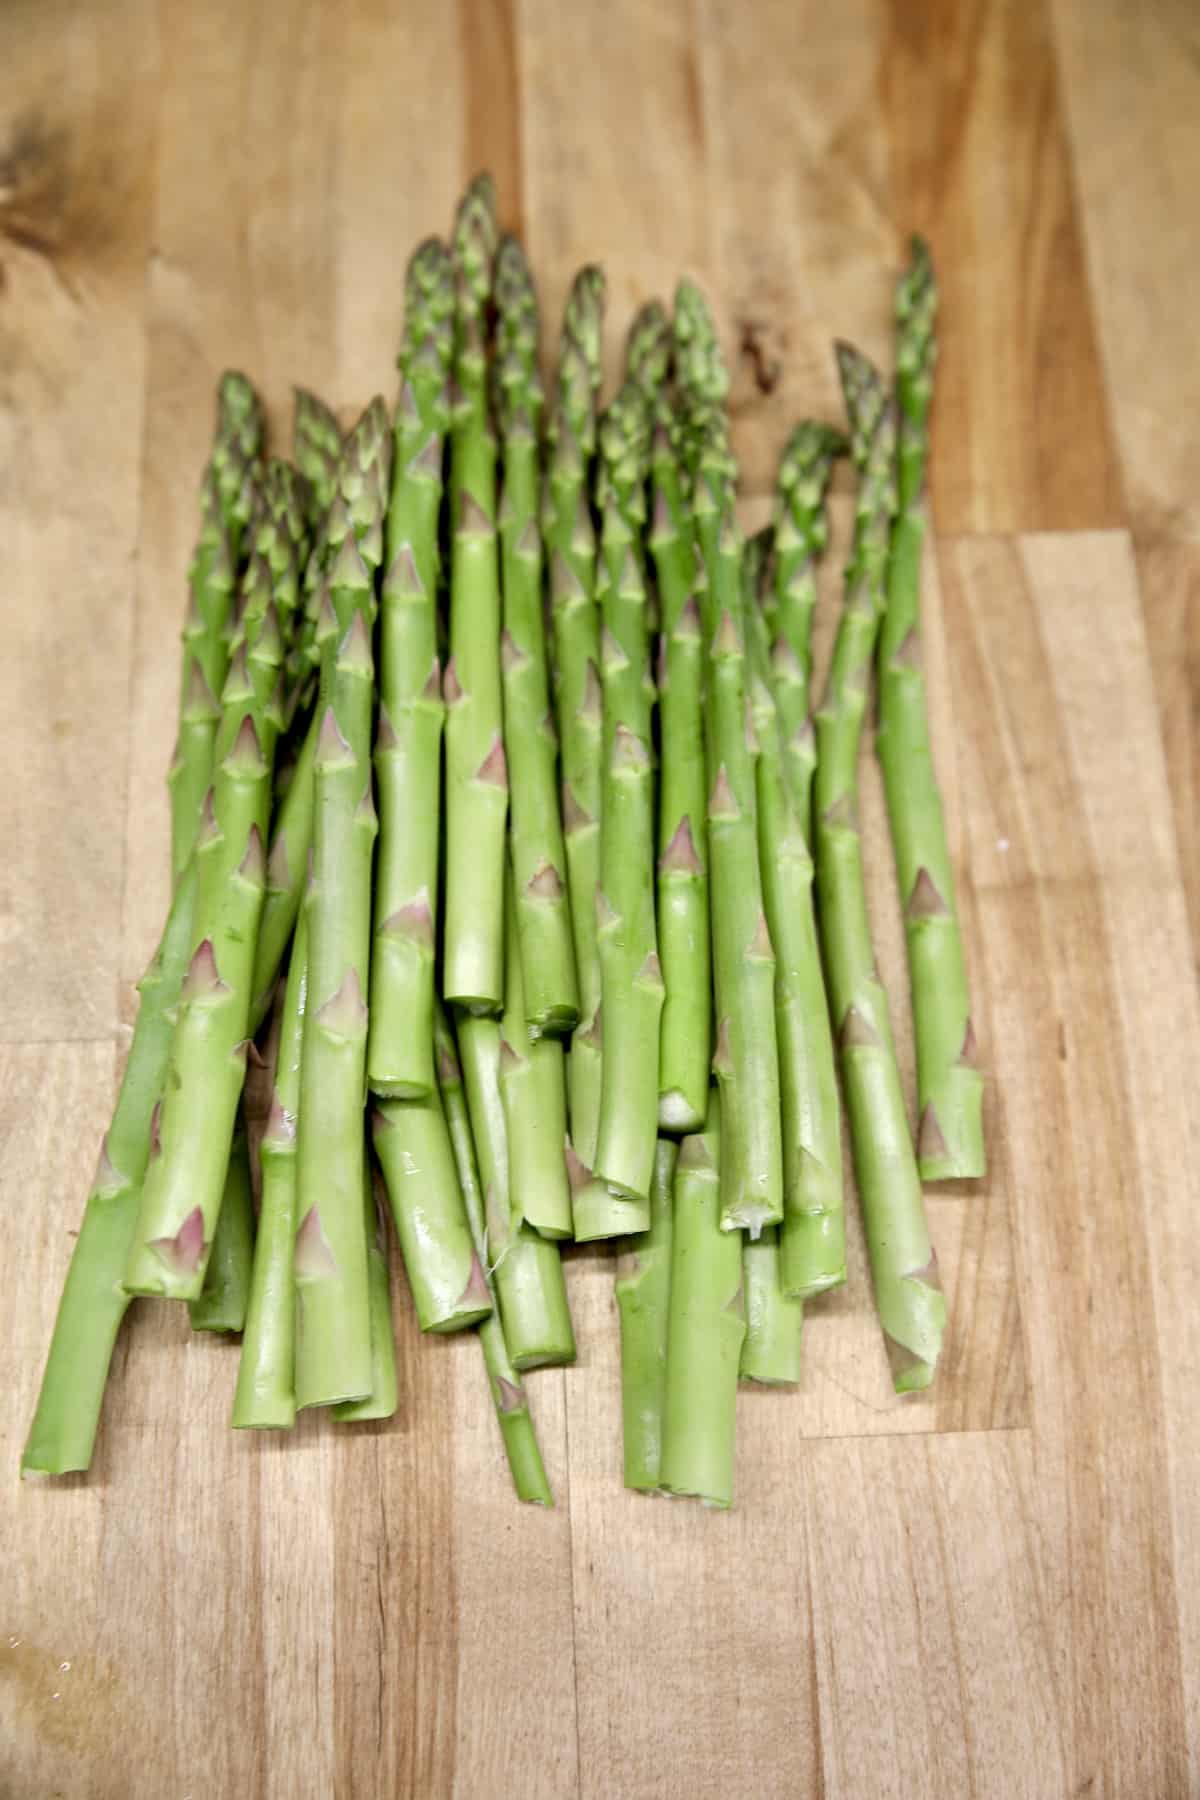 Asparagus stalks on wood counter top.